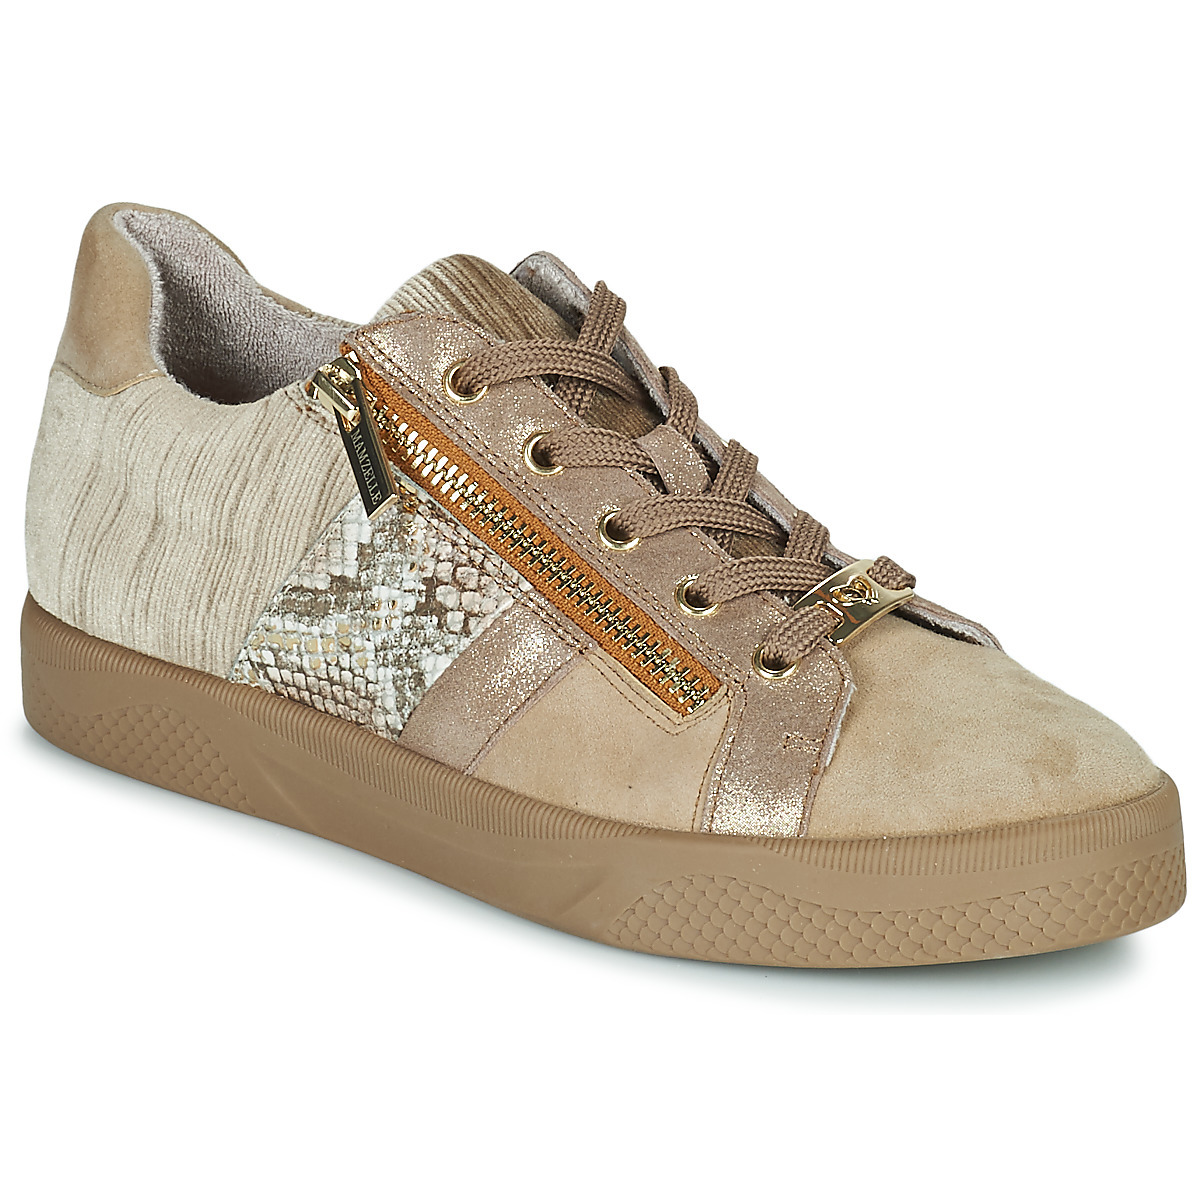 Mam'Zelle Woman Brown Sneakers at Spartoo GOOFASH